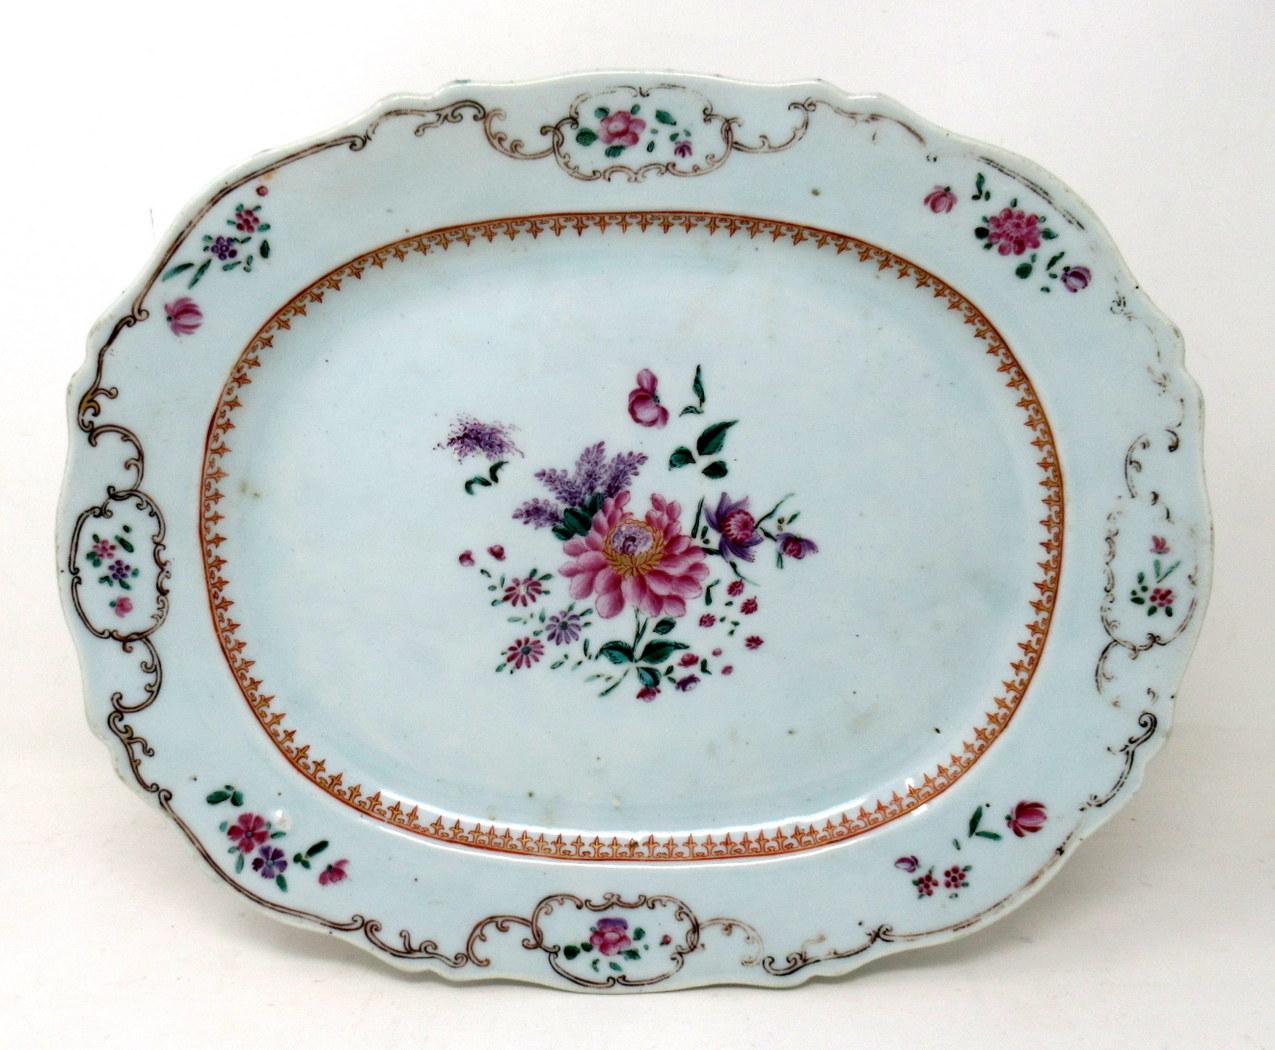 Fine Pair Heavy Gauge Chinese Quing Dynasty Porcelain Famille Rose Mandarin Cabinet Plates or Chargers of outstanding quality and impressive sizes. 

Hand decorated in brightly coloured enamels each featuring a central spray of flowers and